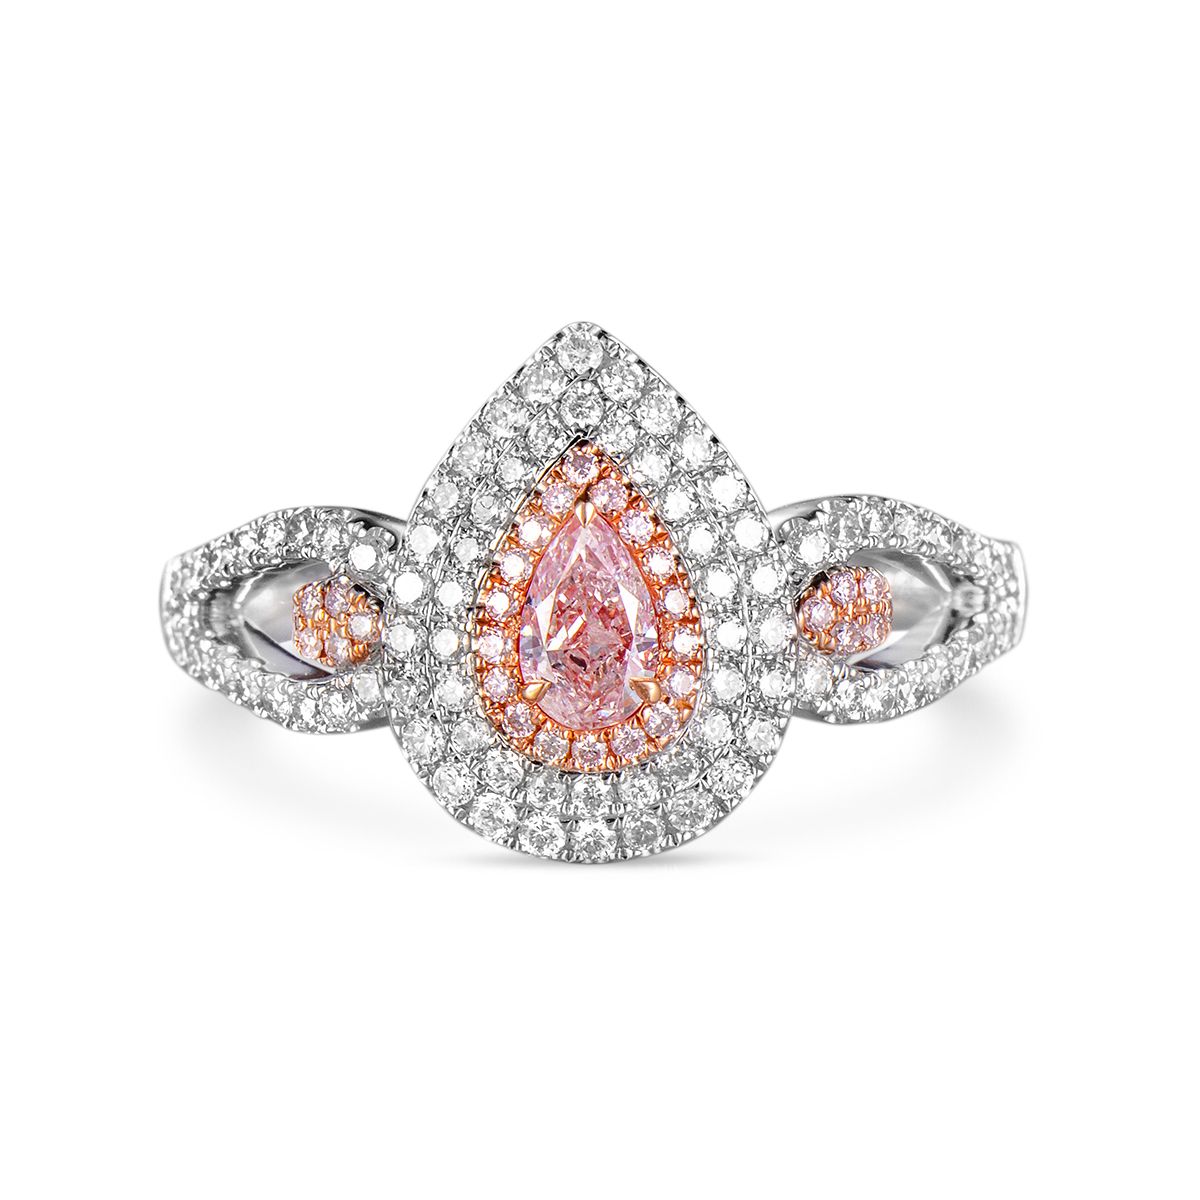 Faint Pink Diamond Ring, 0.24 Ct. (0.75 Ct. TW), Pear shape, GIA Certified, 6183475397